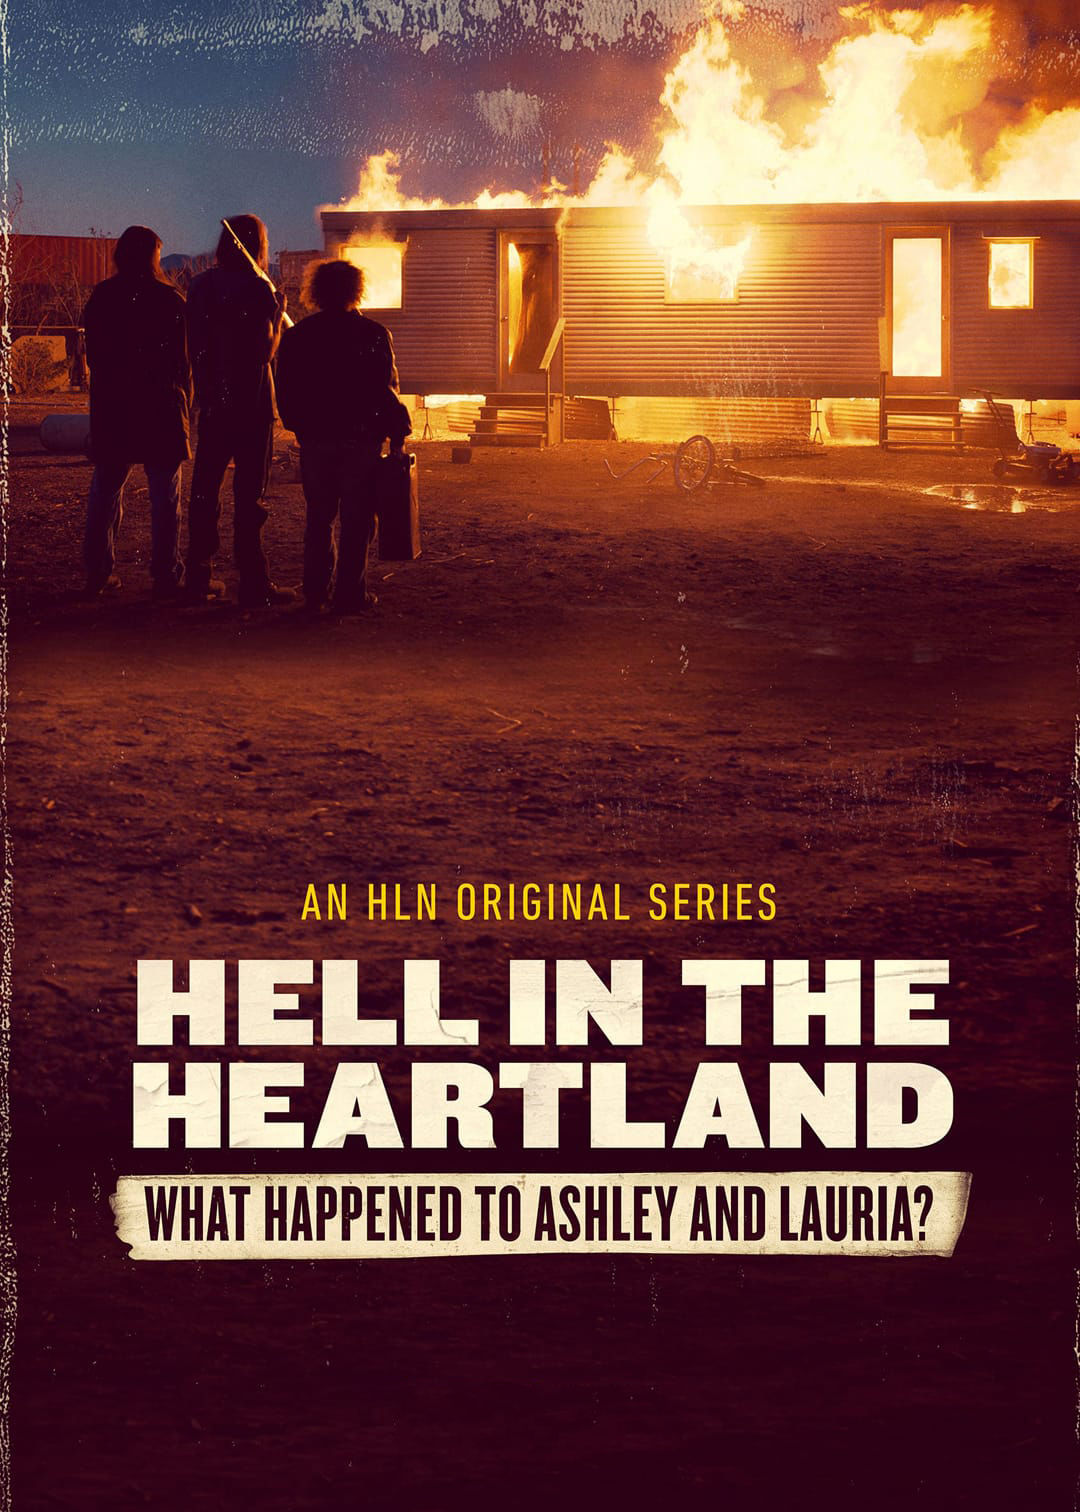 Hell in the Heartland: What Happened to Ashley and Lauria ne zaman